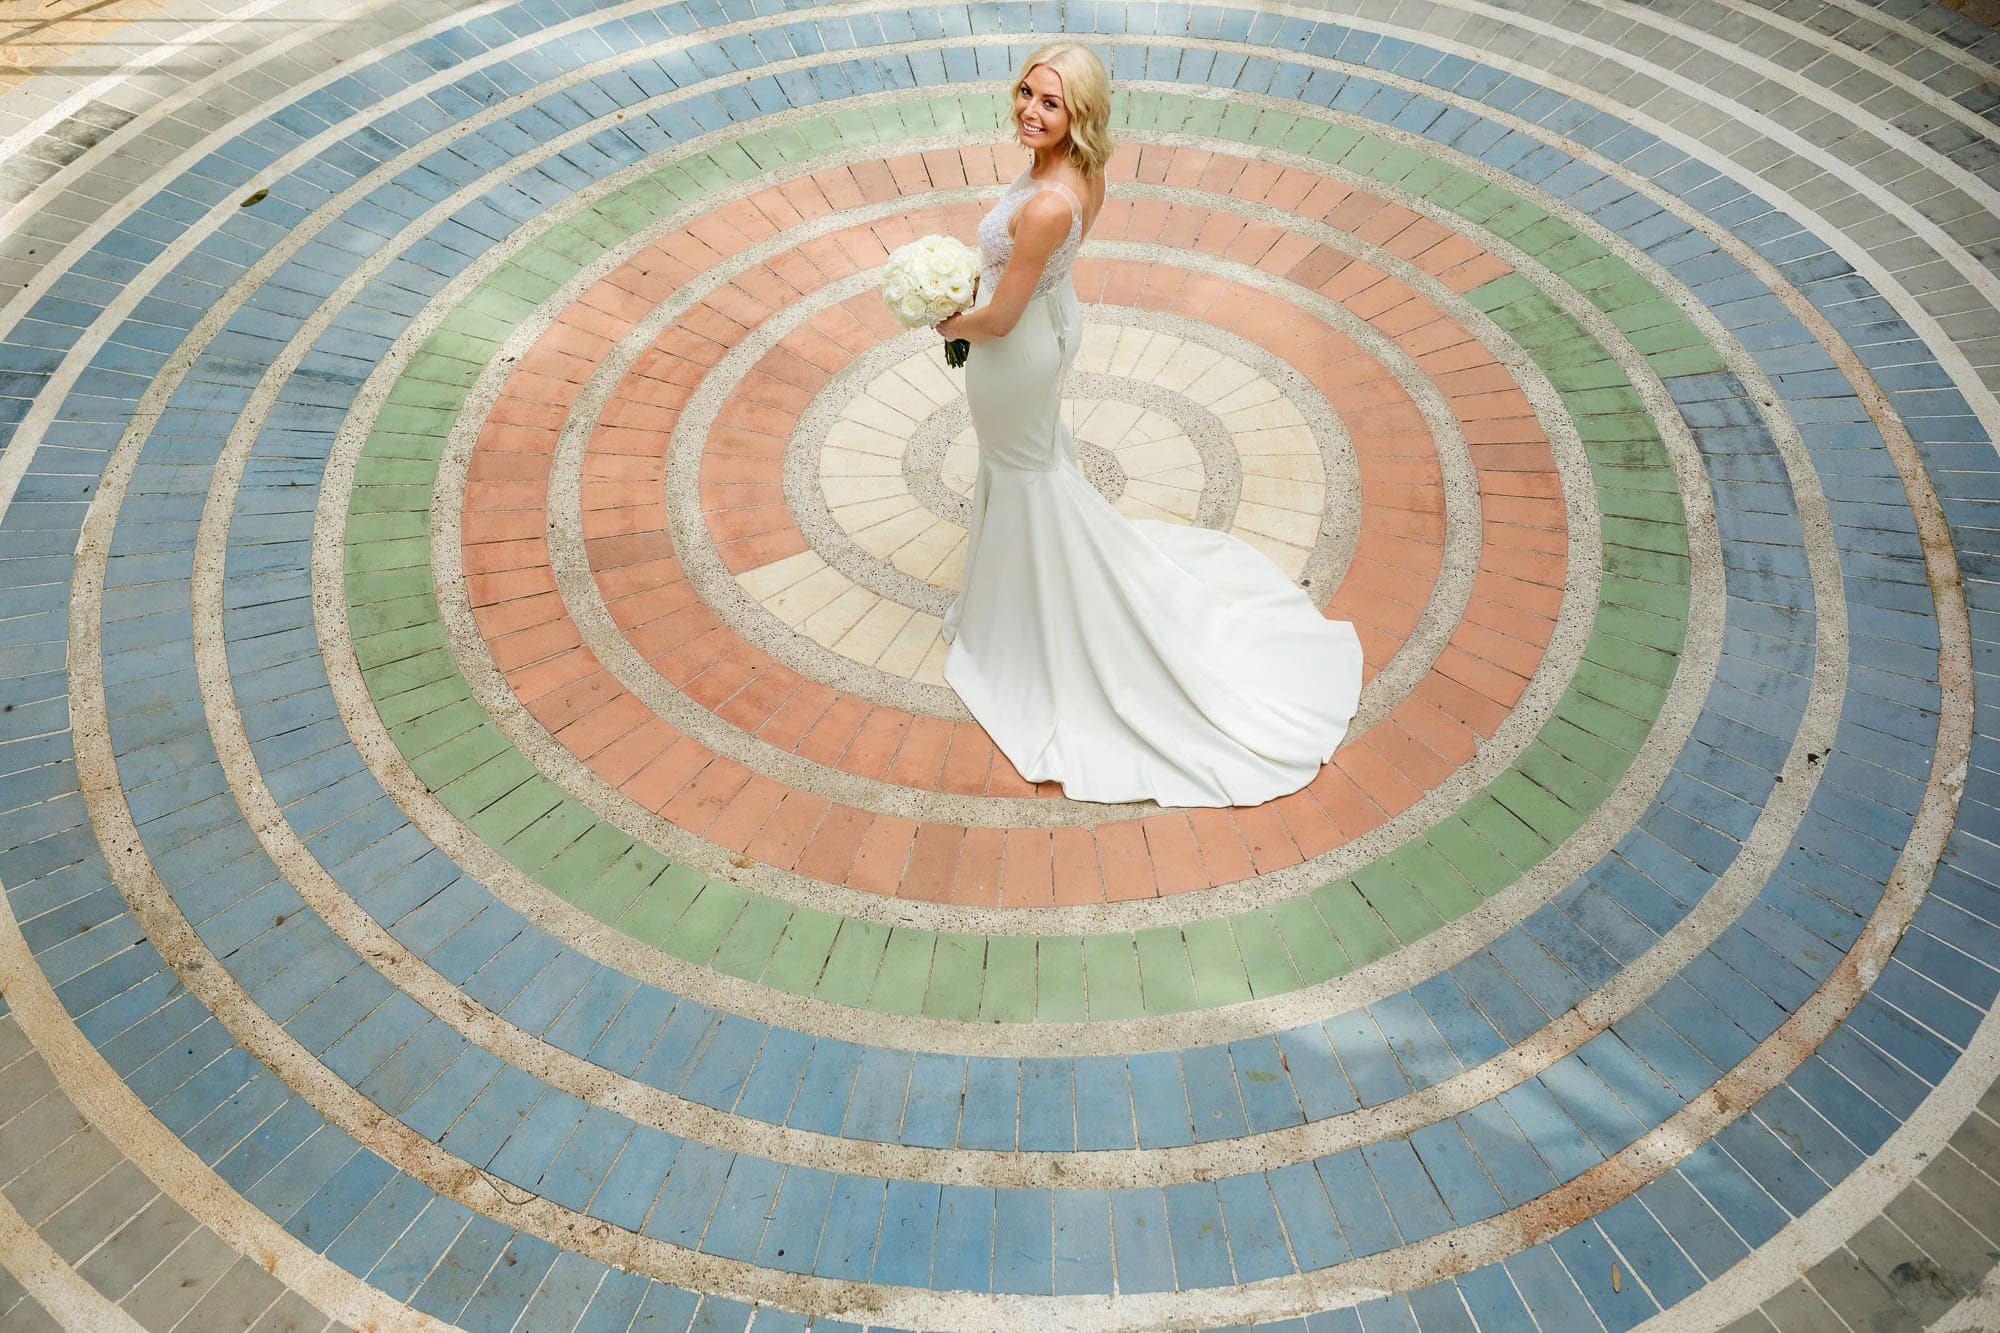 The bride at the center of a circular colored brick pattern